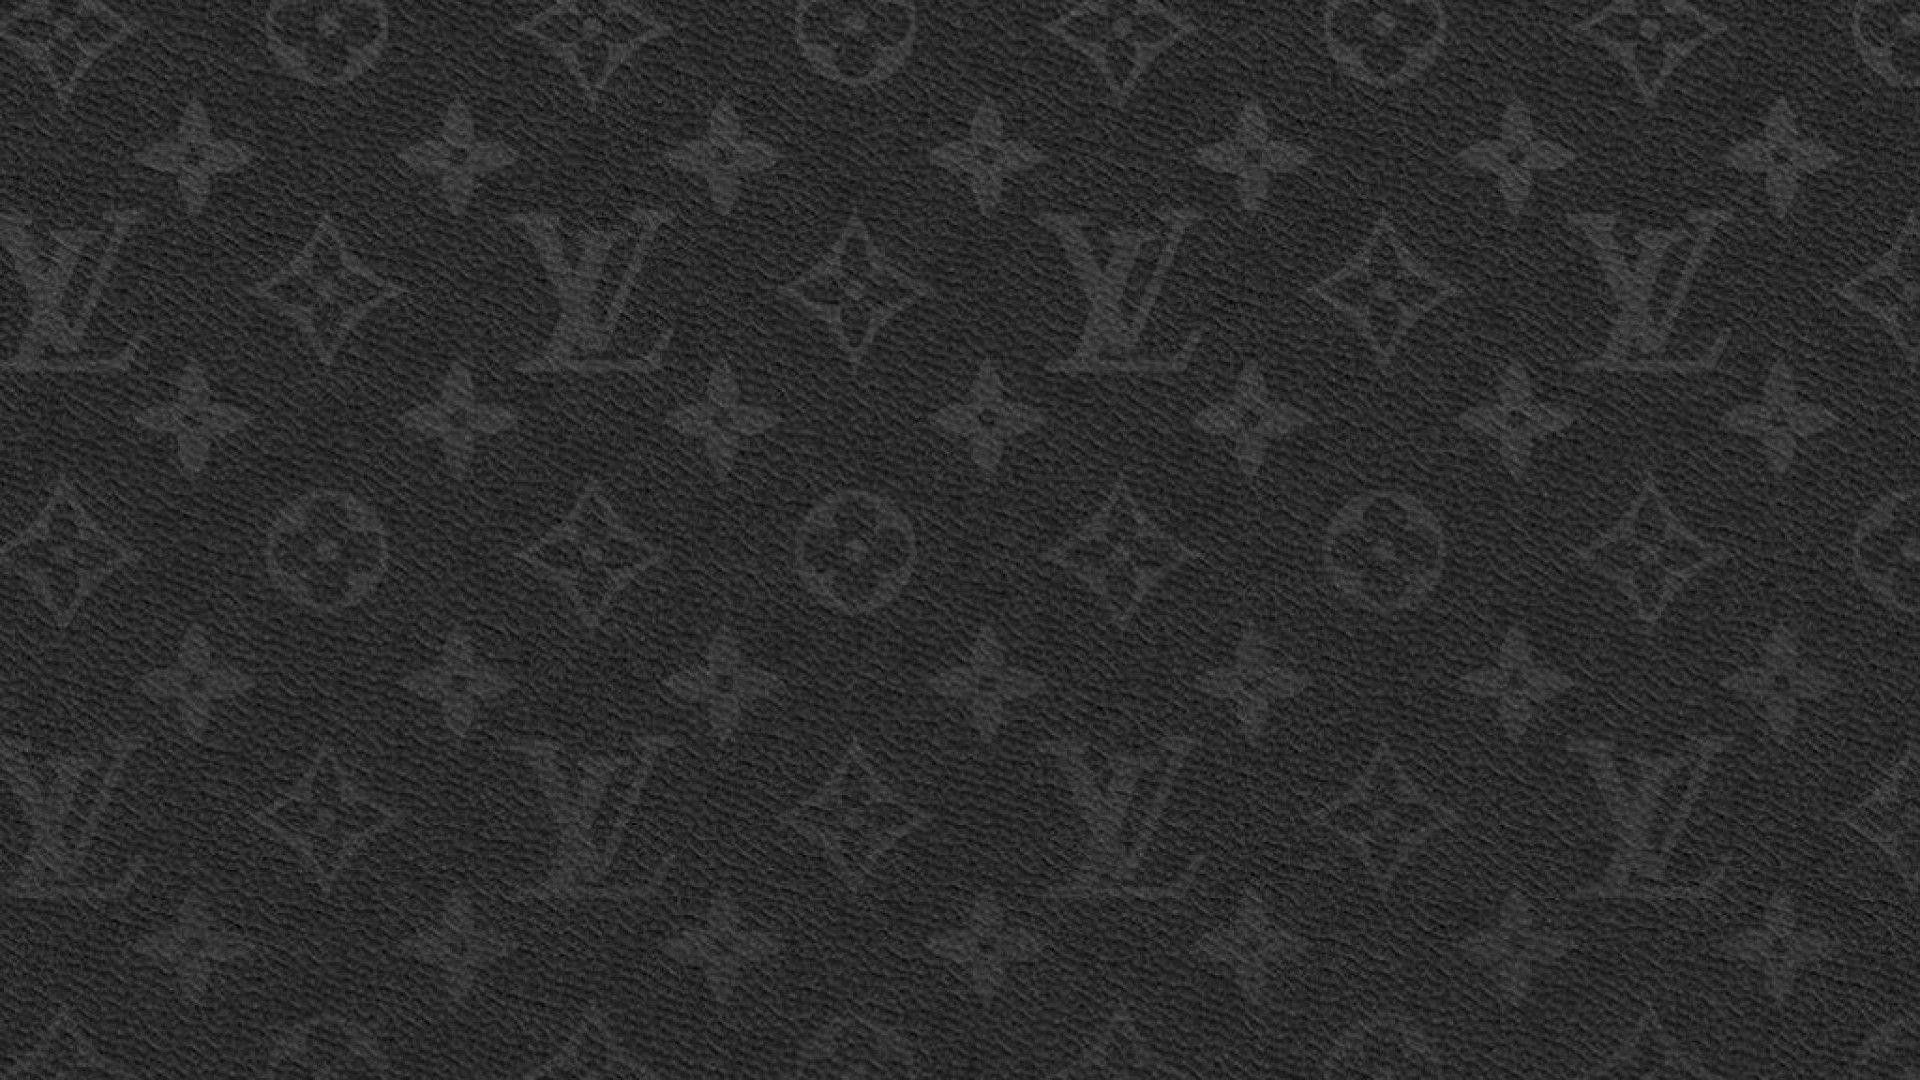 logo louis vuitton backgrounds pictures download hd background wallpapers  free amazing cool tablet smart phone high